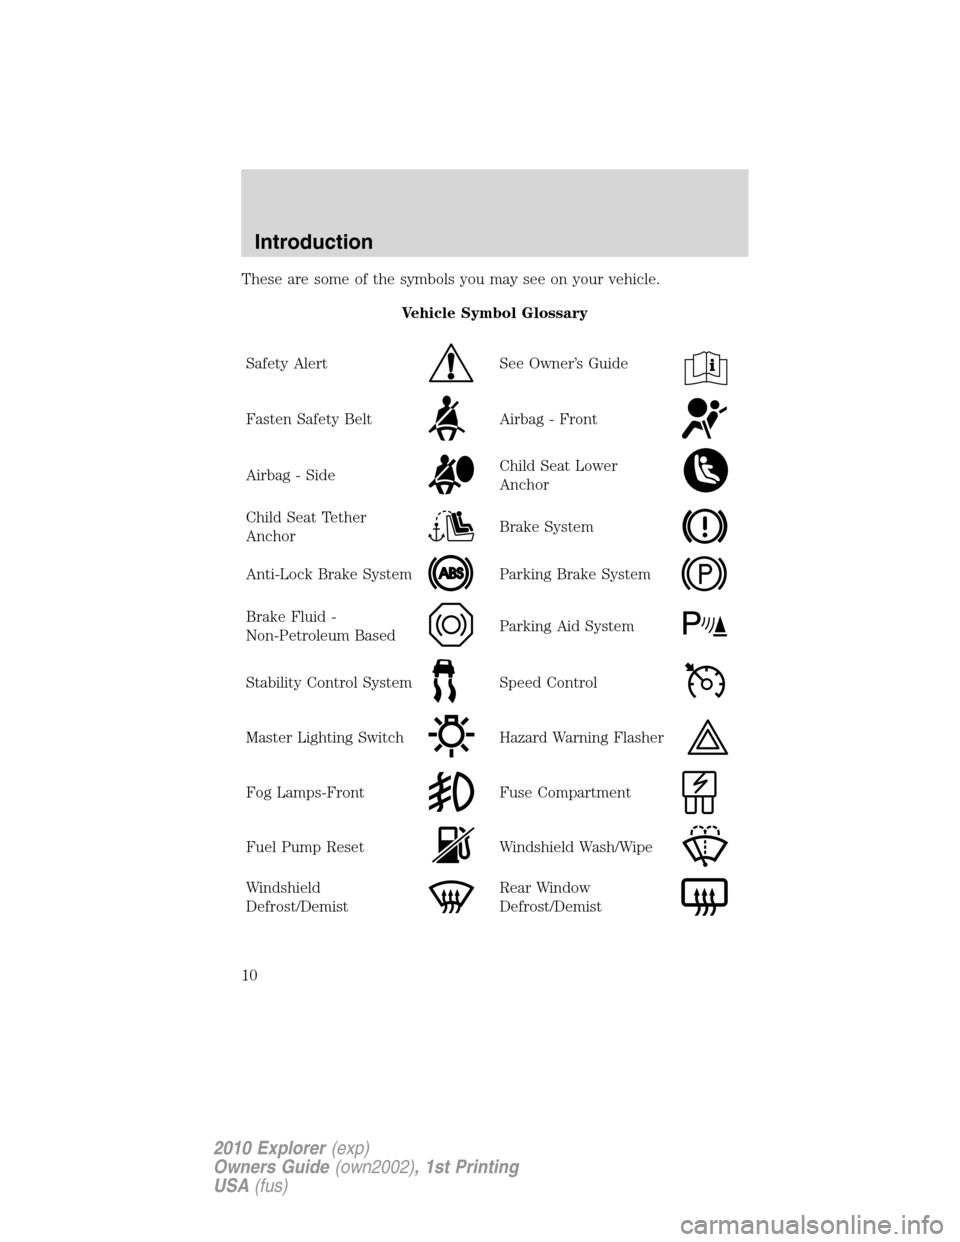 FORD EXPLORER 2010 4.G Owners Manual These are some of the symbols you may see on your vehicle.
Vehicle Symbol Glossary
Safety Alert
See Owner’s Guide
Fasten Safety BeltAirbag - Front
Airbag - SideChild Seat Lower
Anchor
Child Seat Tet